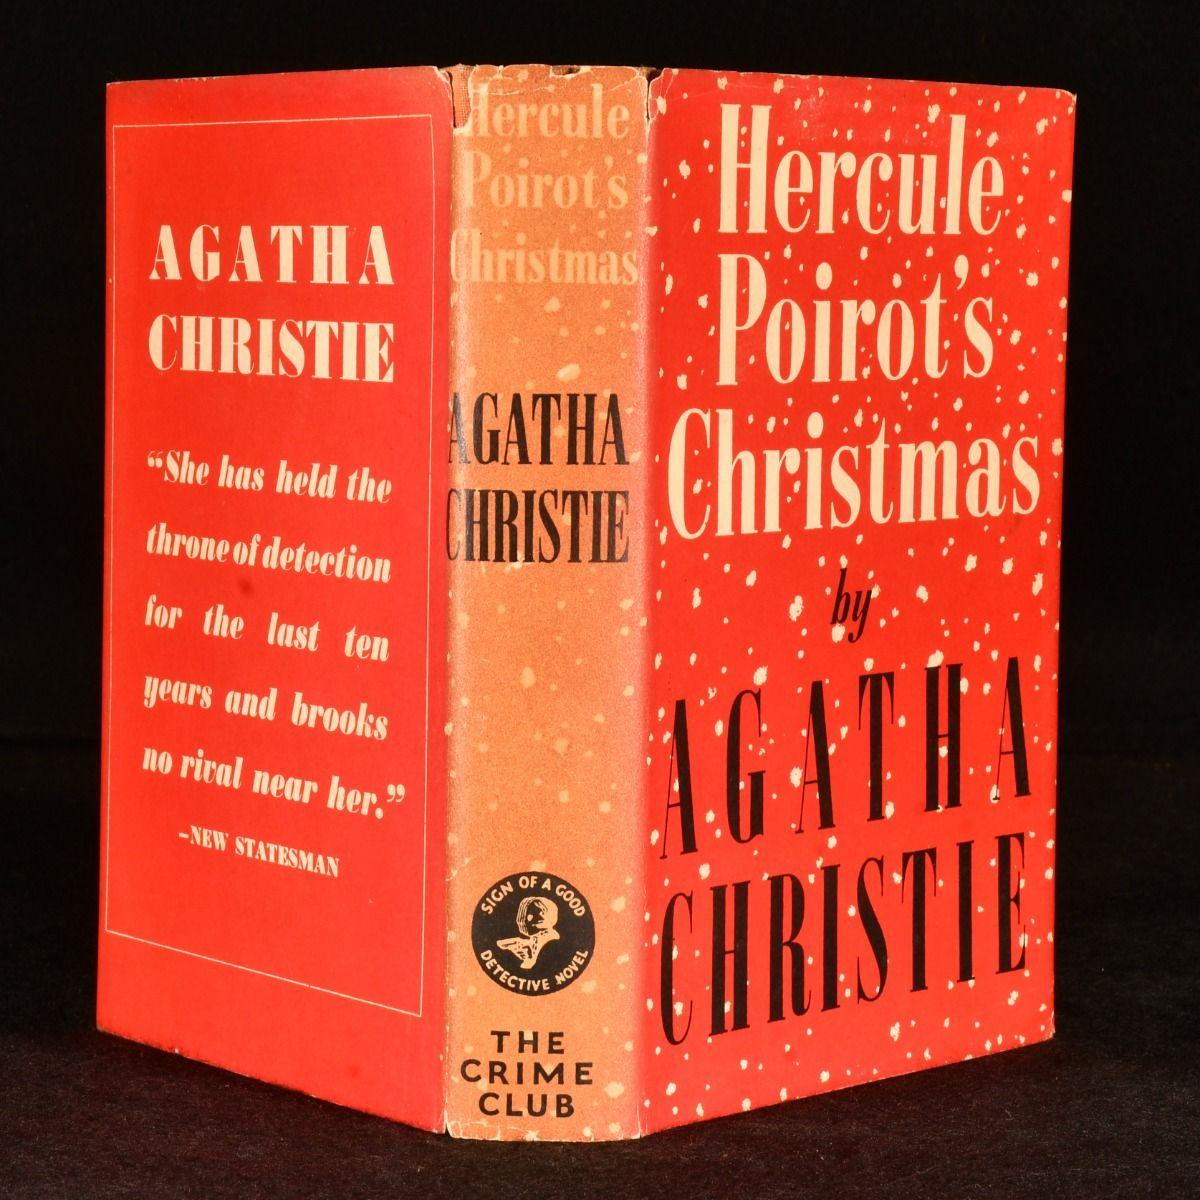 The scarce first edition of this festive novel by the Queen of Detective Fiction, Agatha Christie. In the very scarce unclipped dust wrapper.

The first edition, first impression of the work.

In the very scarce unrestored first state unclipped dust